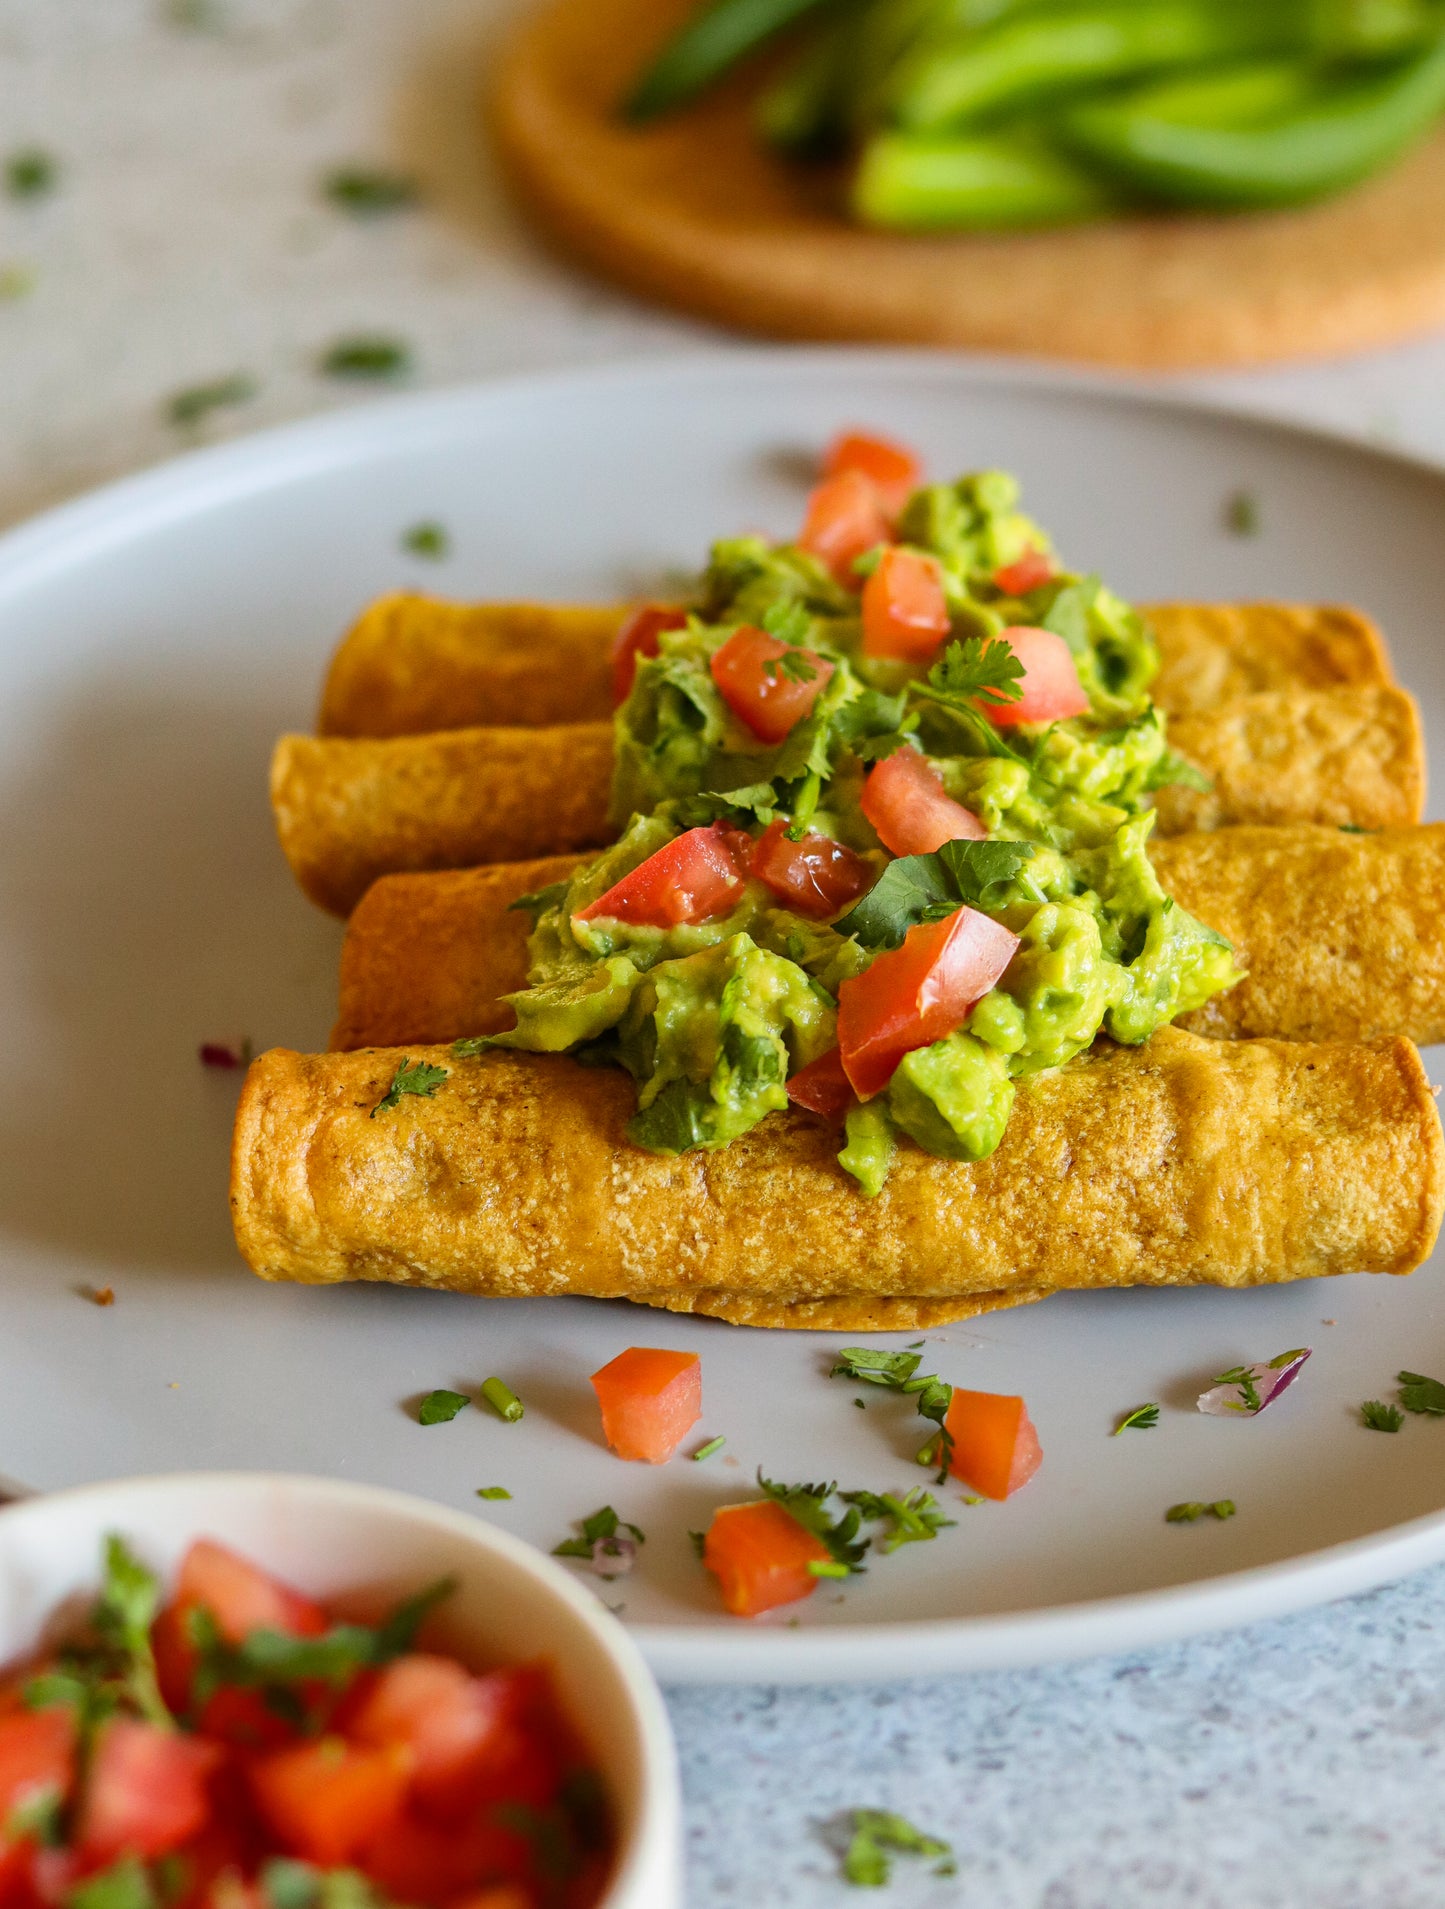 Healthy, Simple, Mexican Recipes (Plant-based and under 30 minutes!)